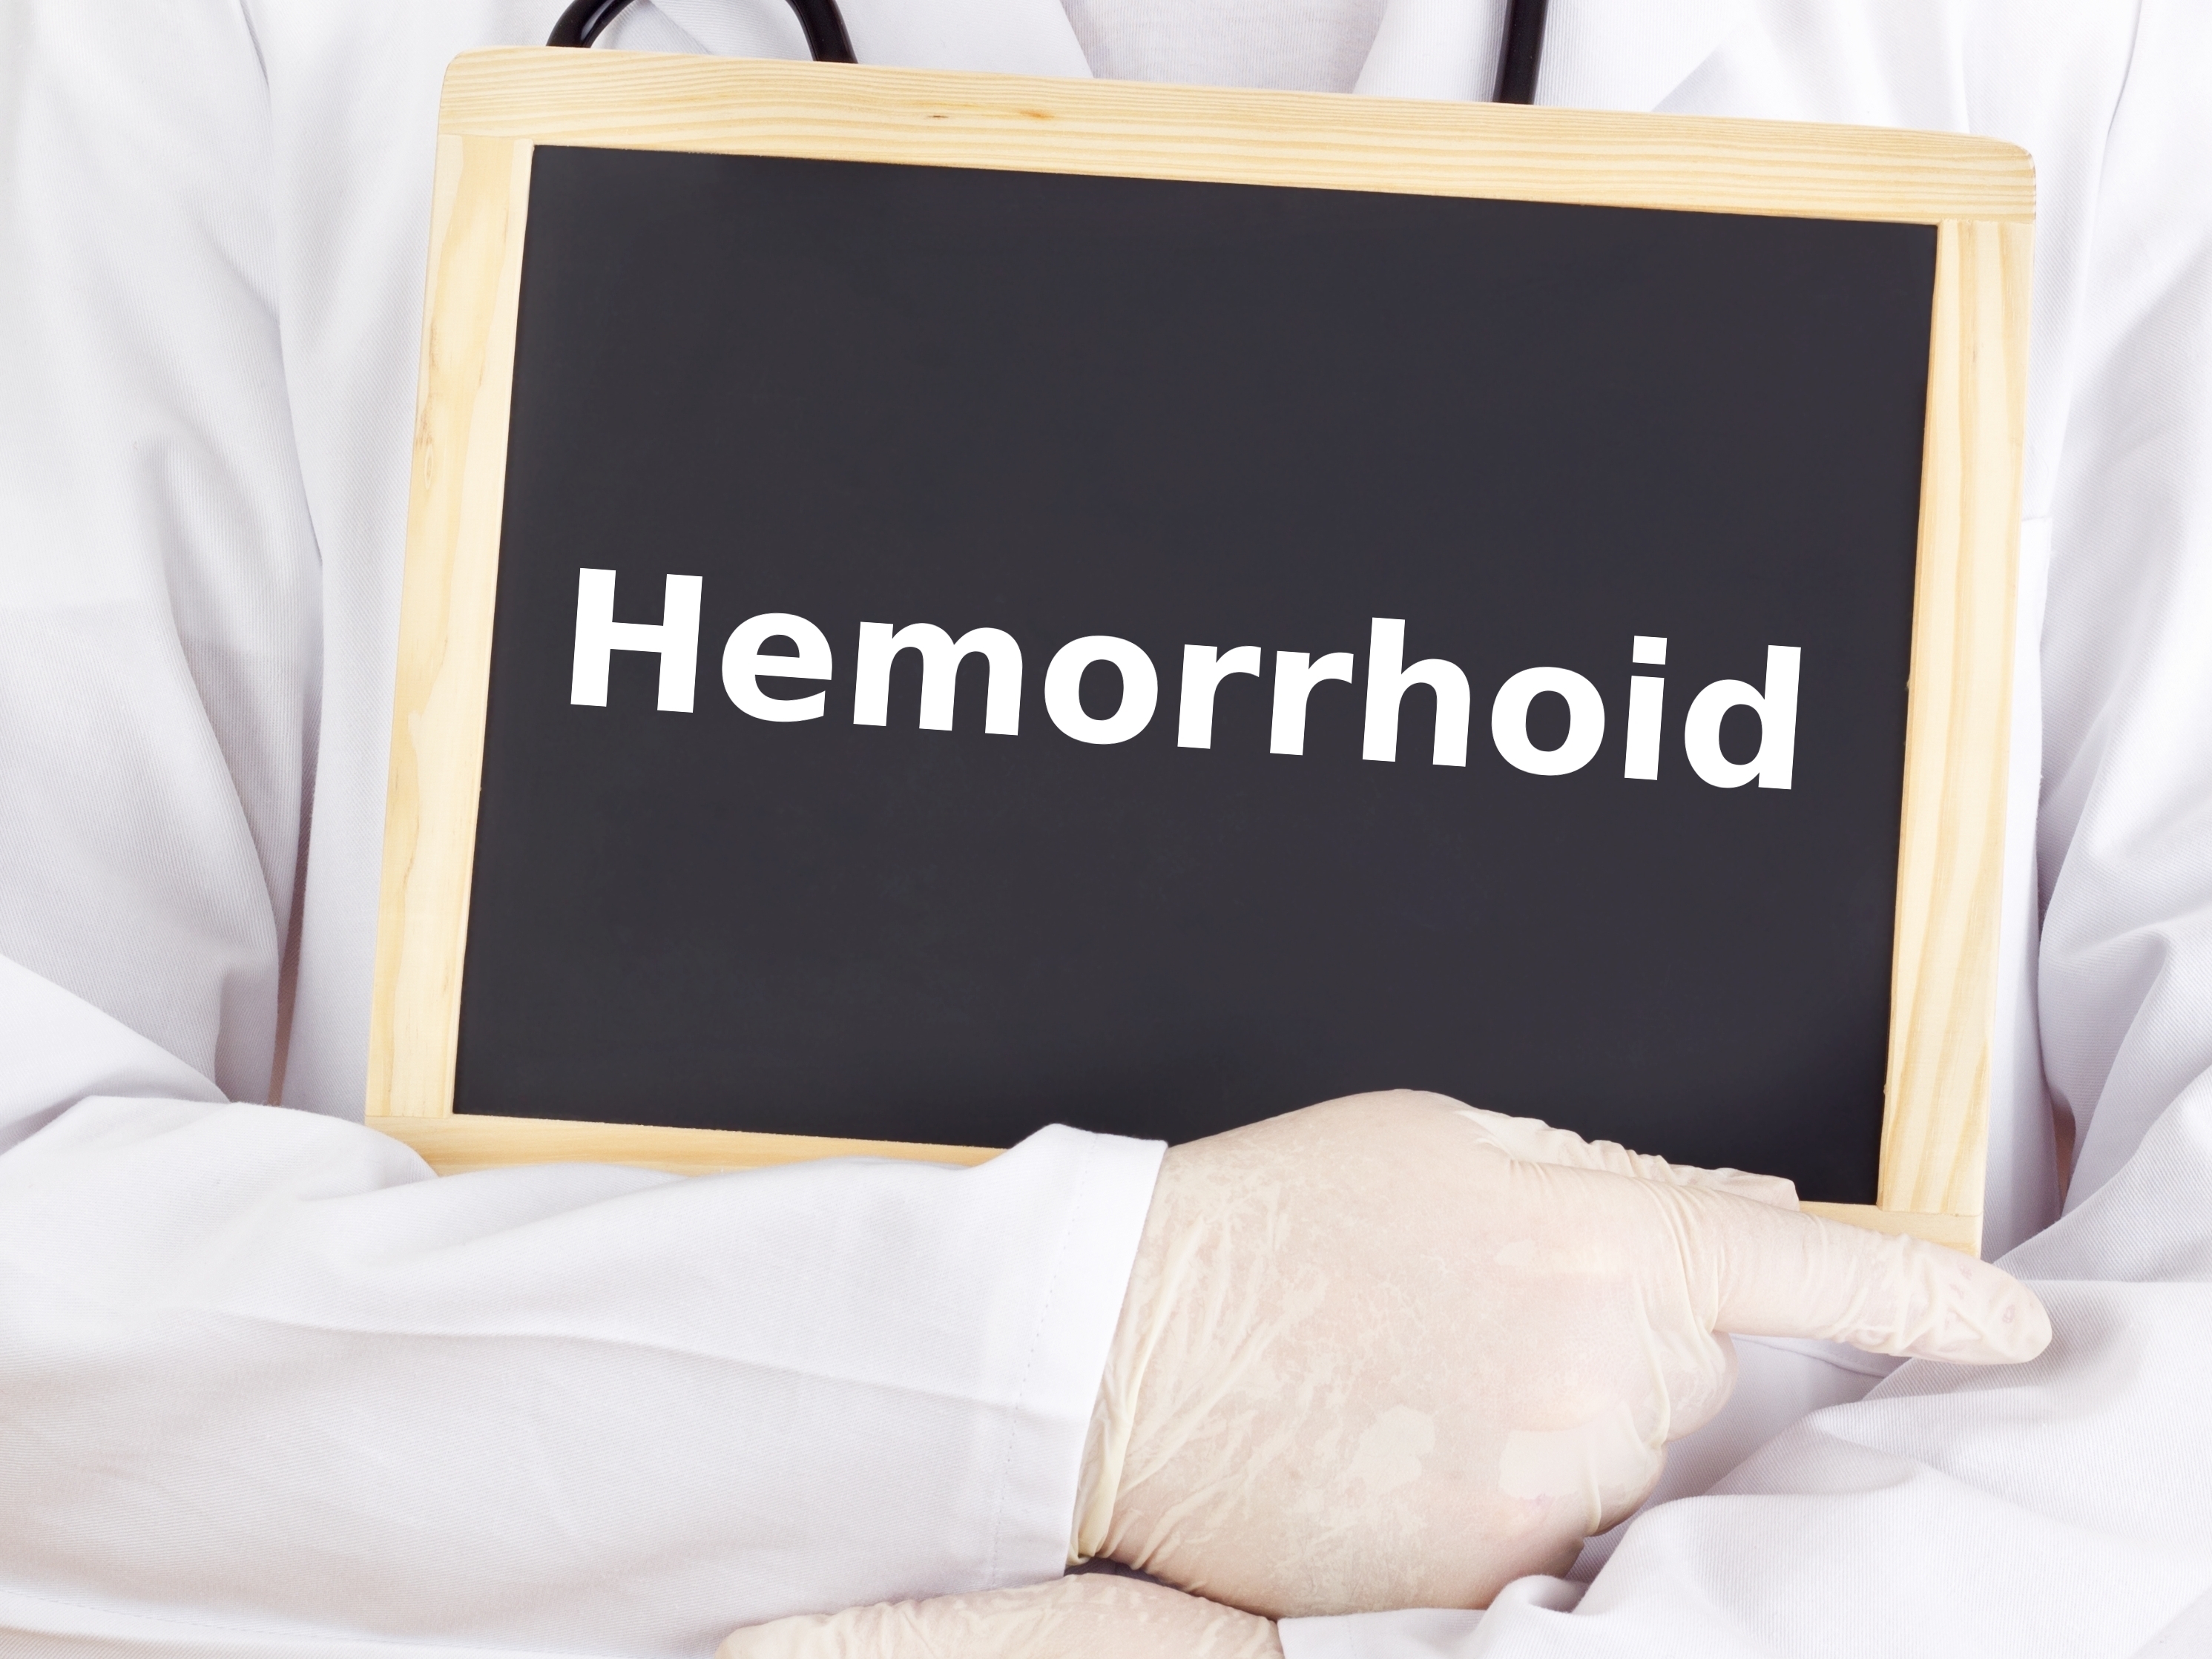 The role of daily habits in hemorrhoid formation